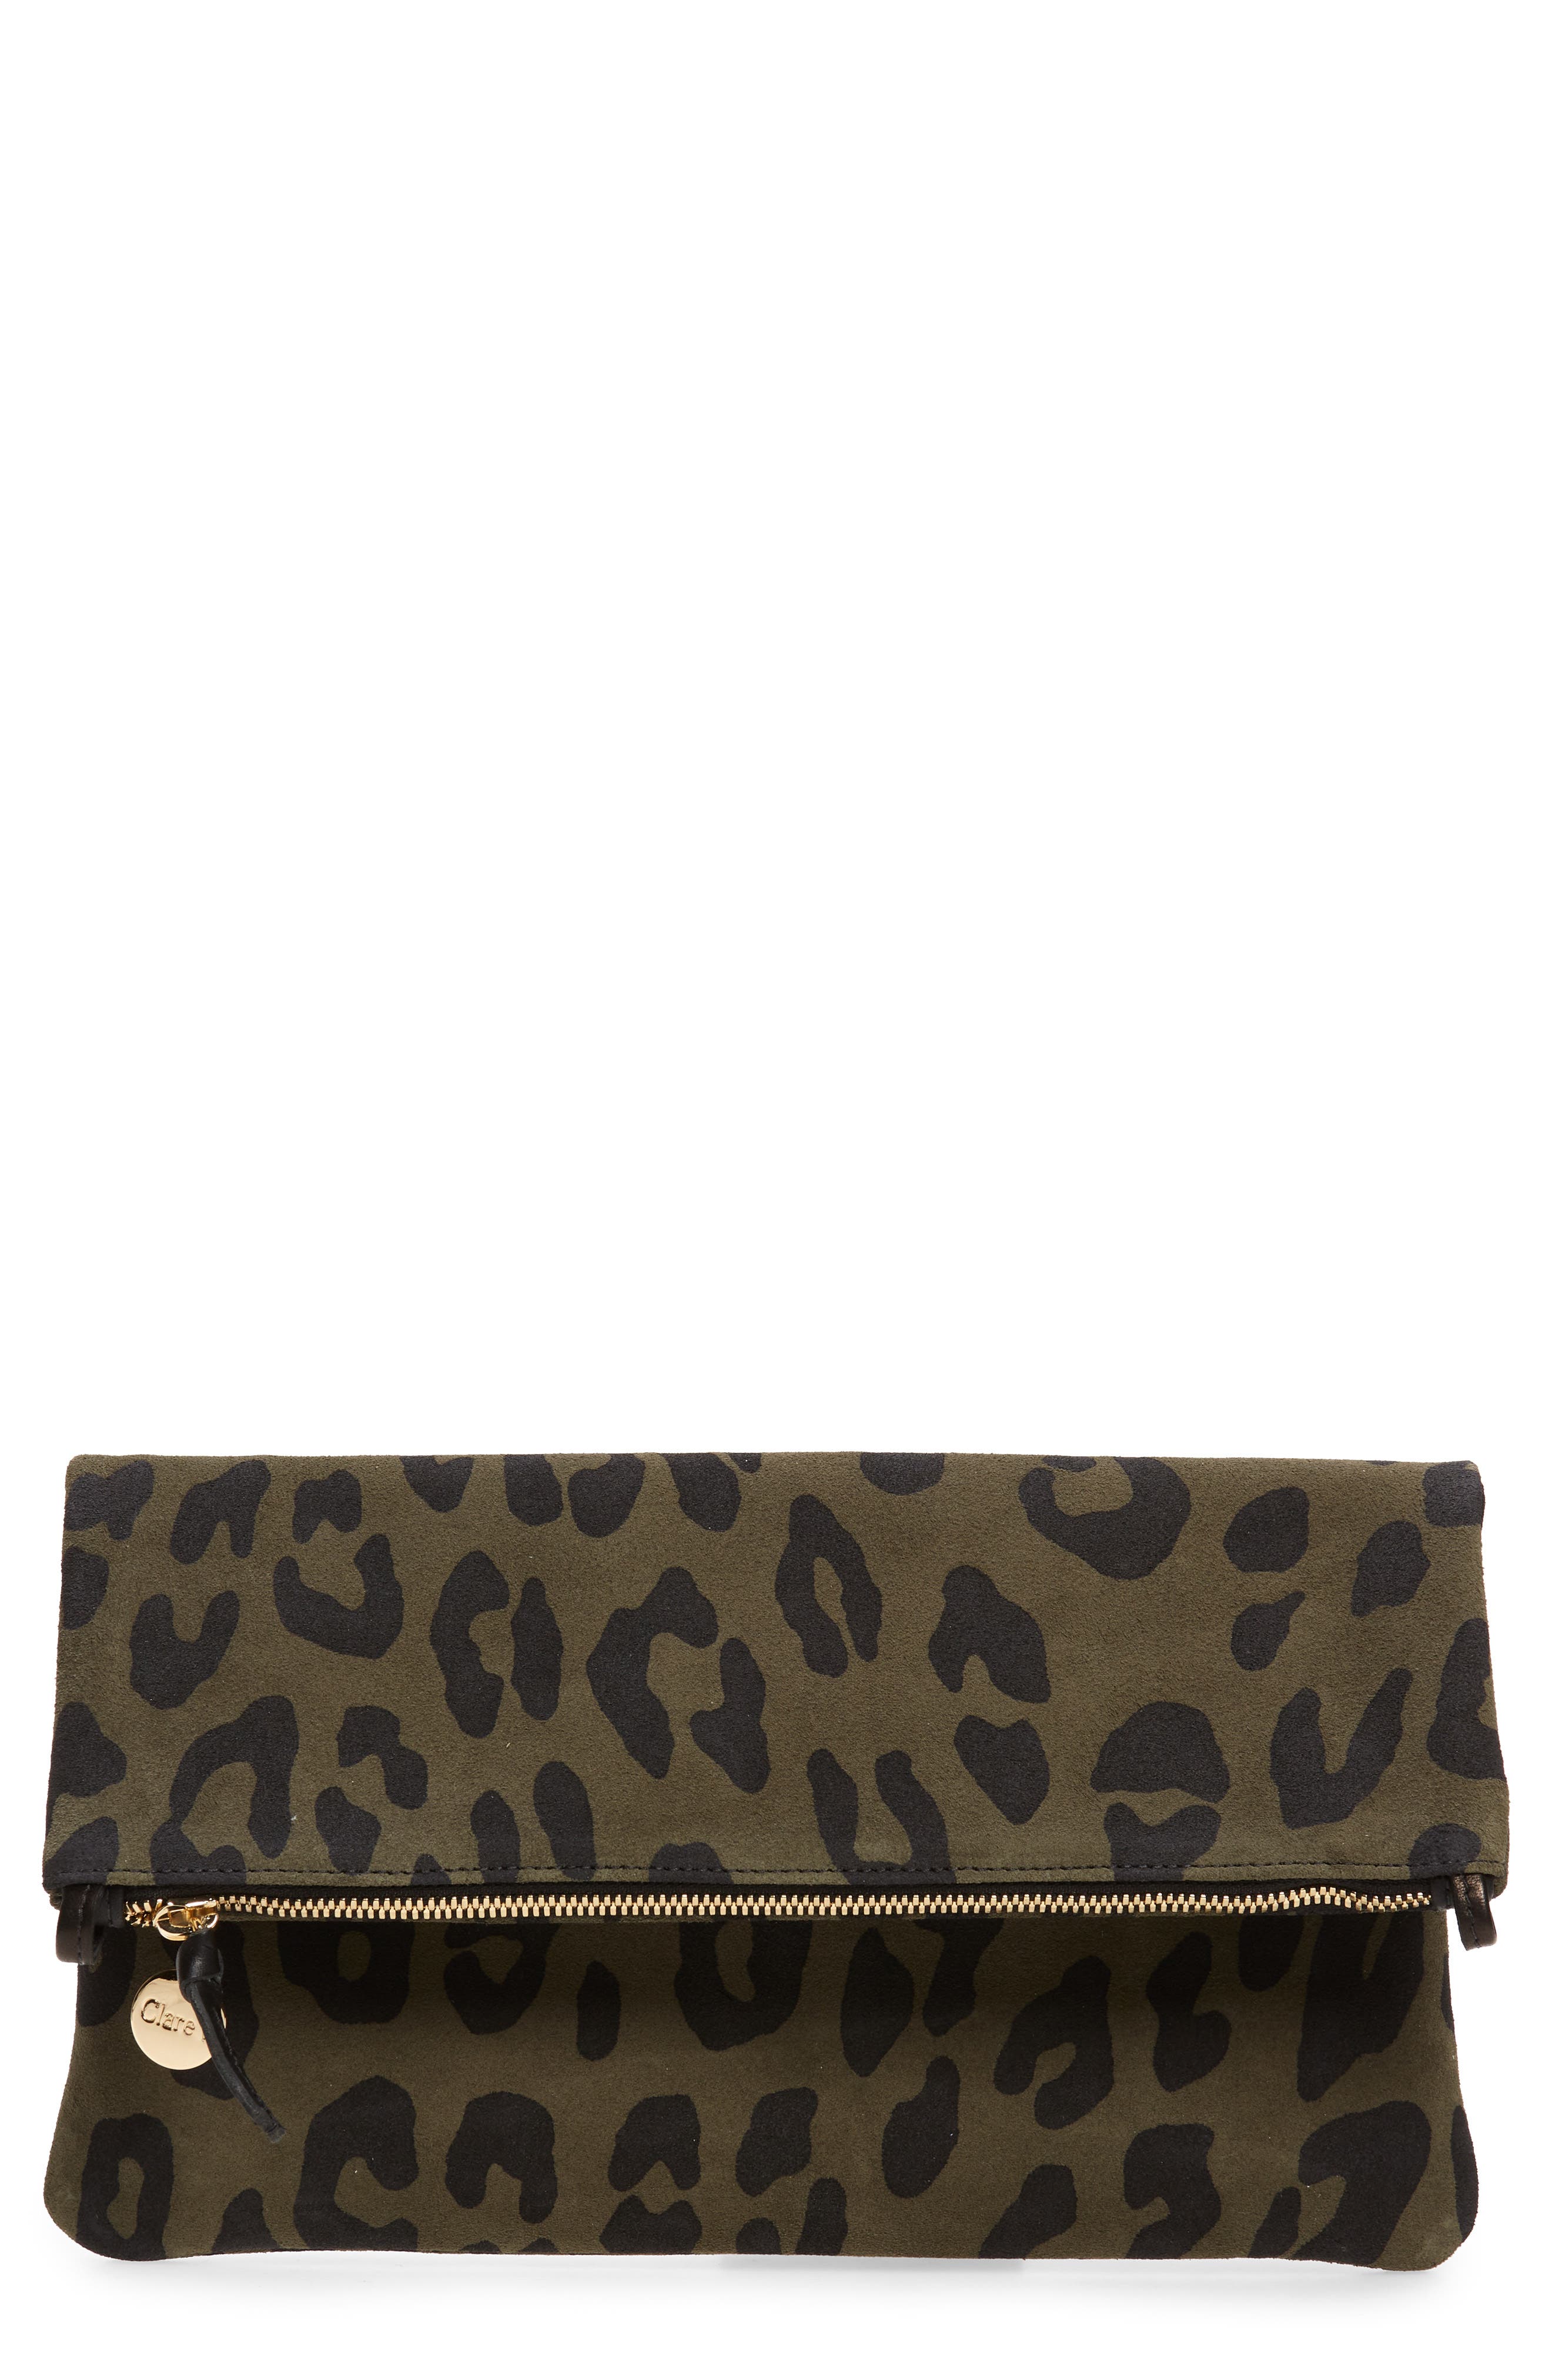 Clare V. Foldover Clutch in Army Pablo Cat Suede